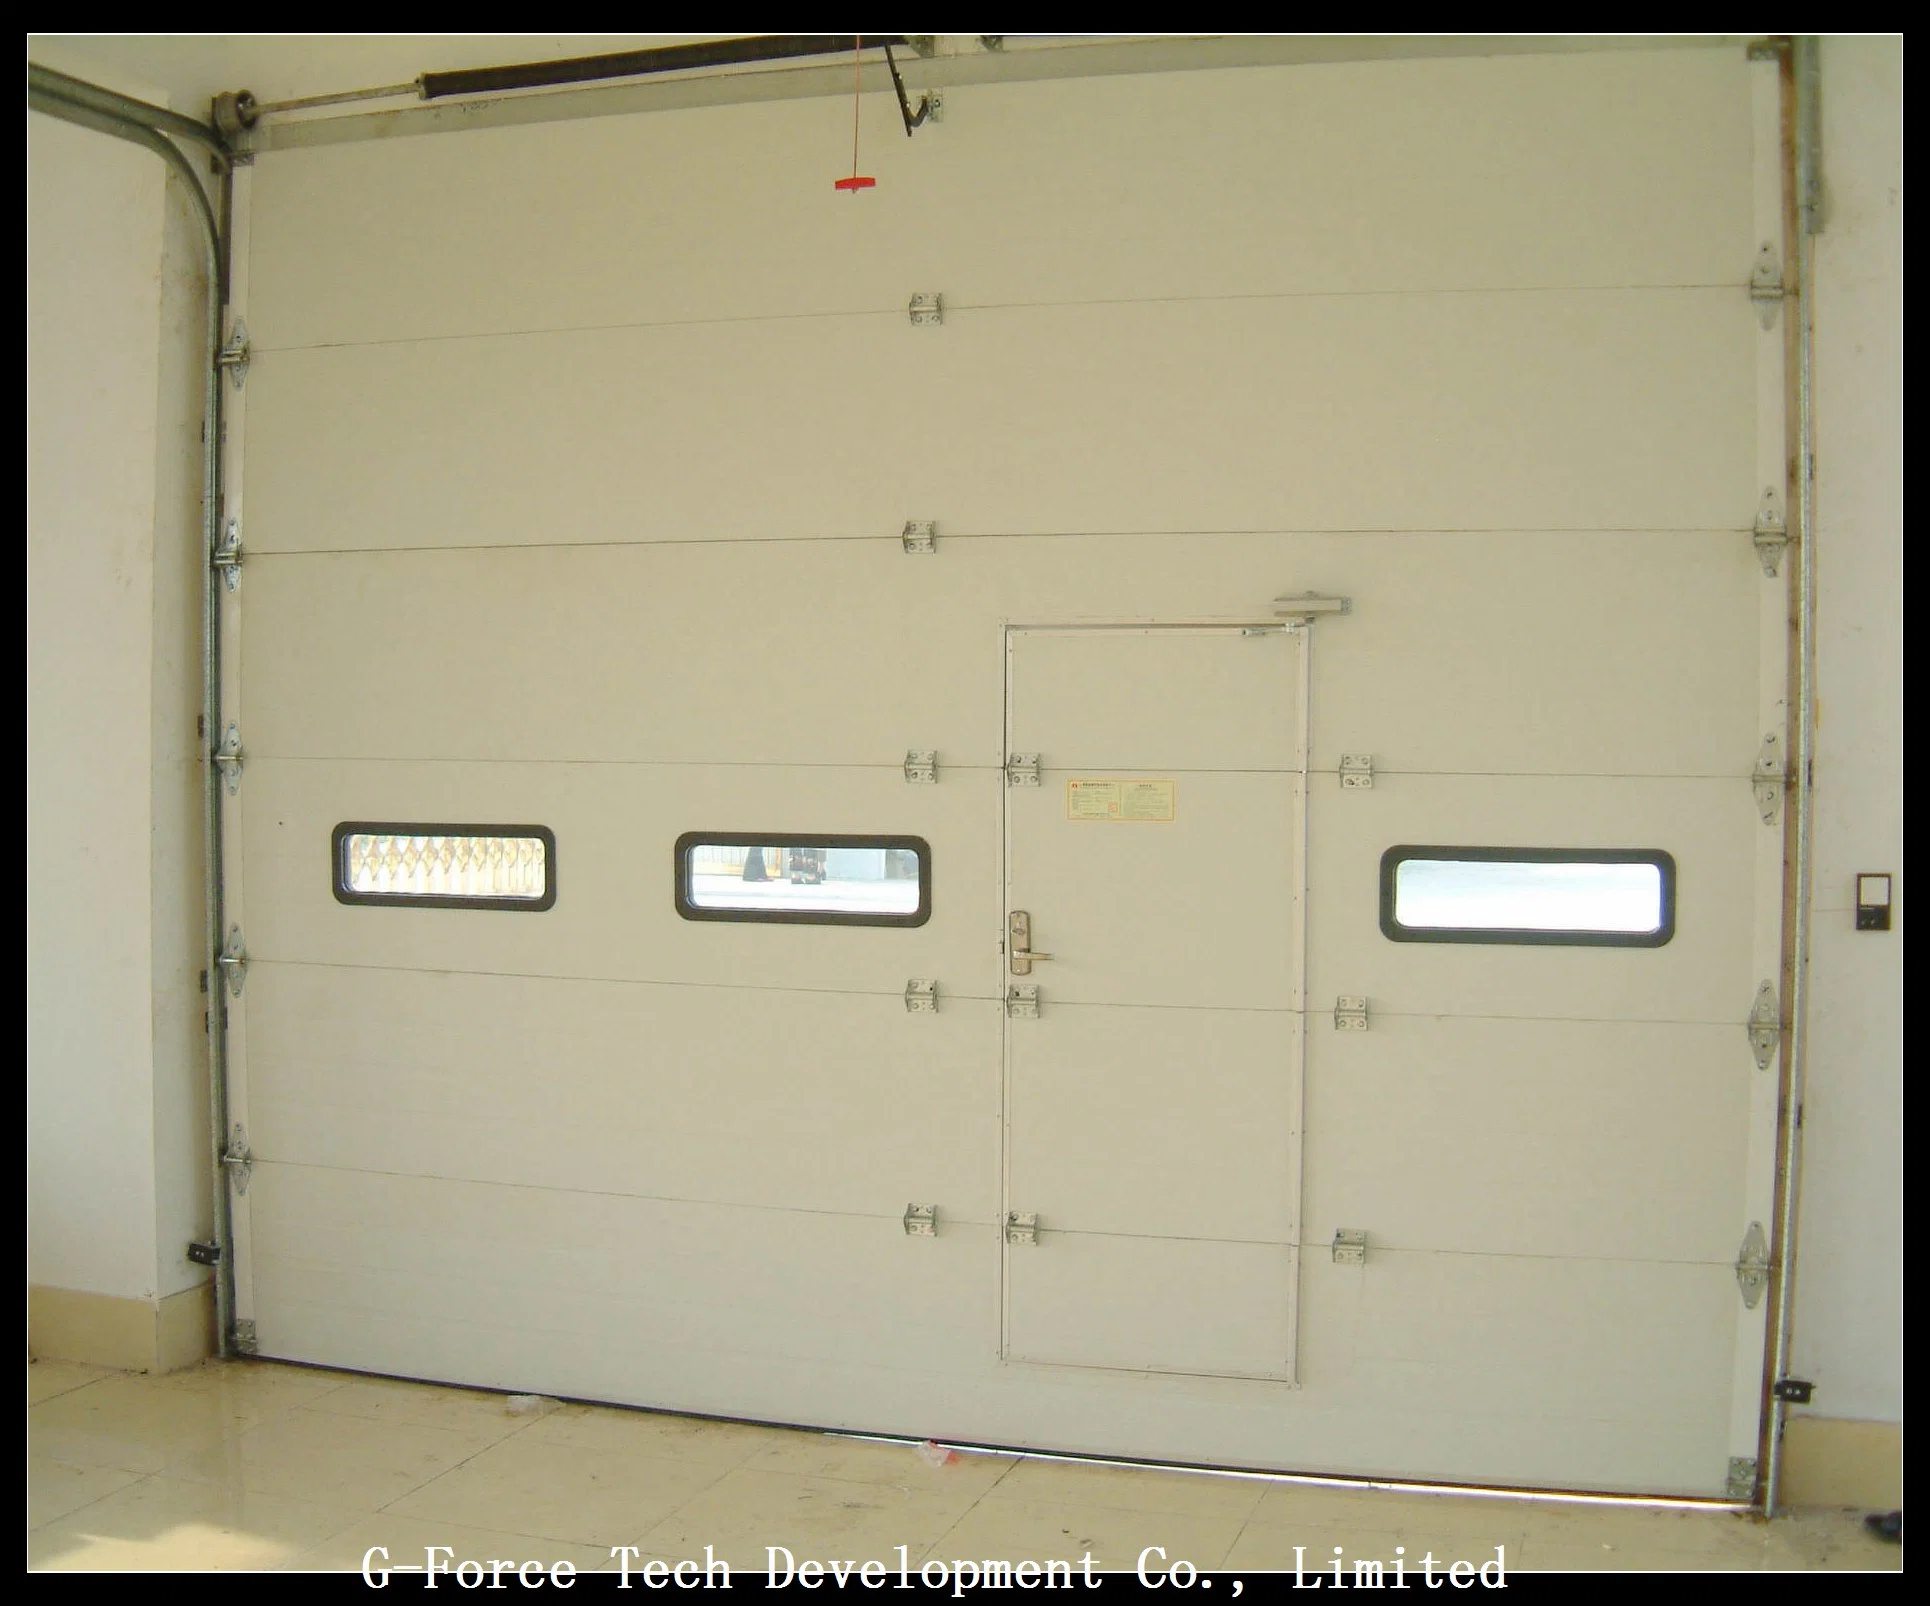 Ral High quality/High cost performance  Automatic Section Garage Door